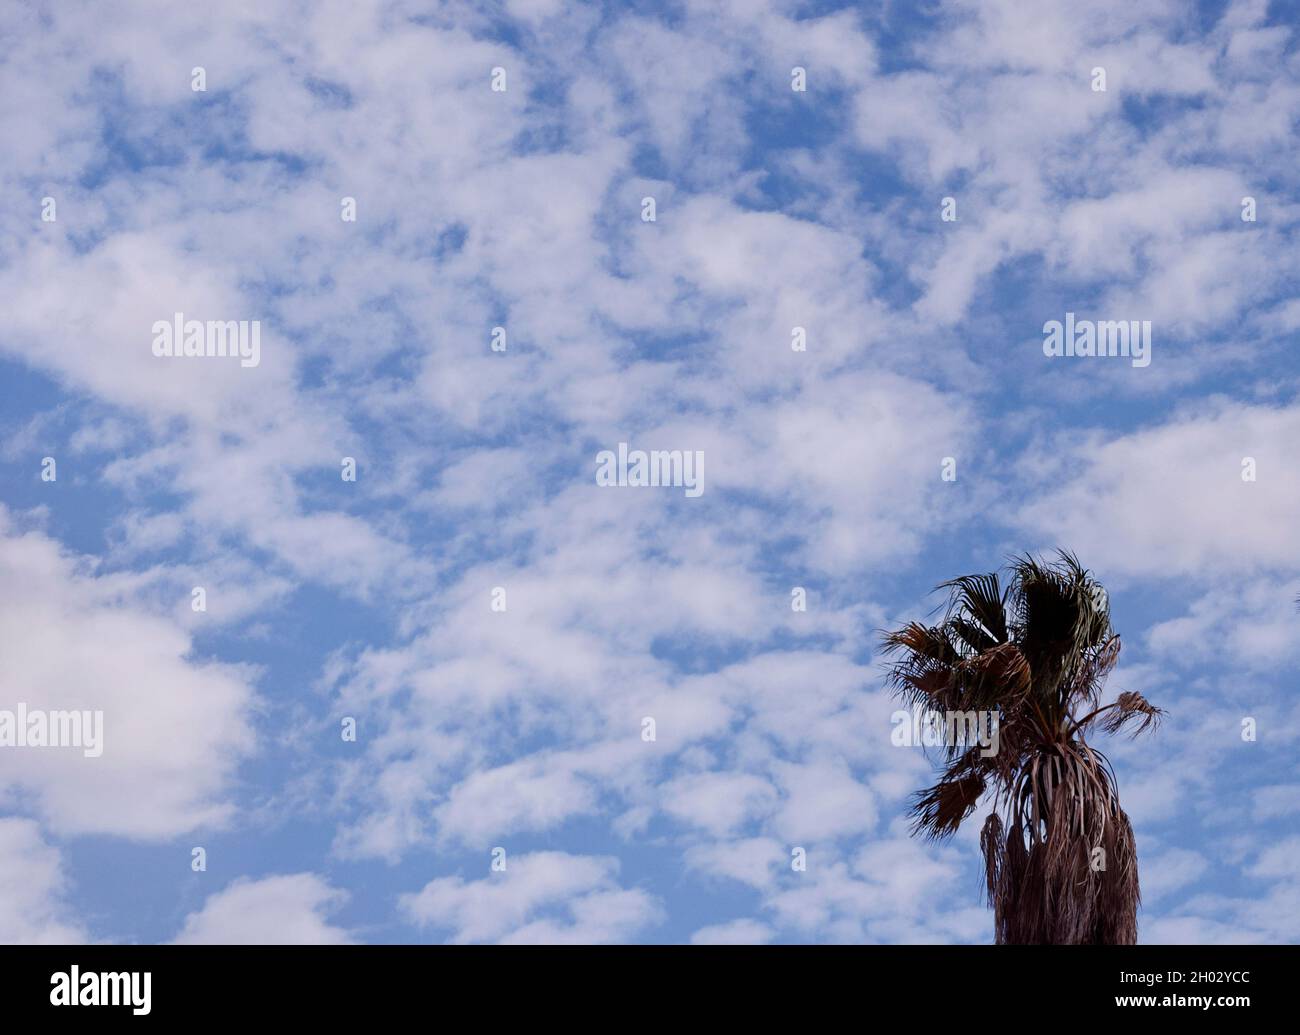 California fan palm silhouetted against a dreamy blue sky with scattered marshmallow cotton ball clouds on a windy day Stock Photo